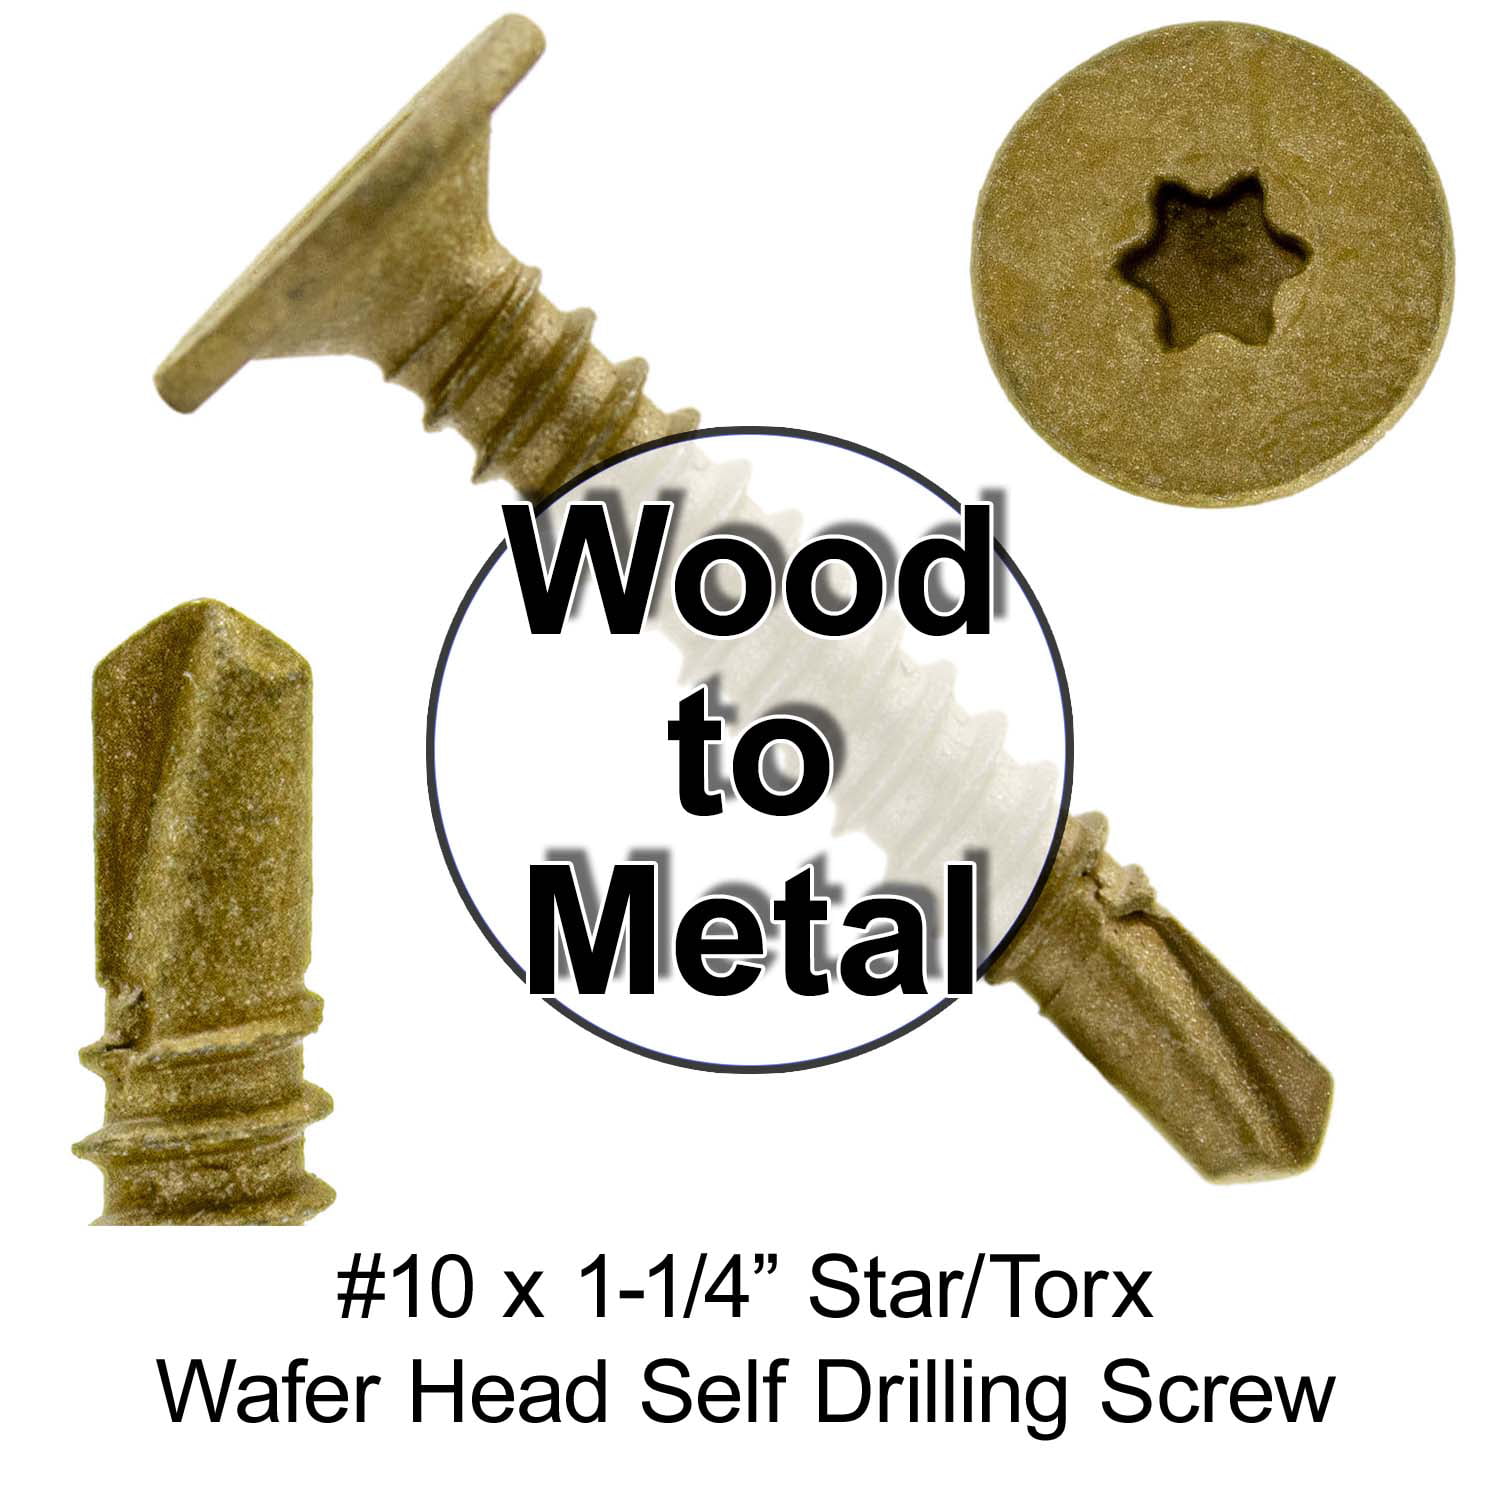 Details about   Self Drilling Wafer Head Screws 1LB 143 PC #10 x 1" Wood to Metal 20-7 GA 